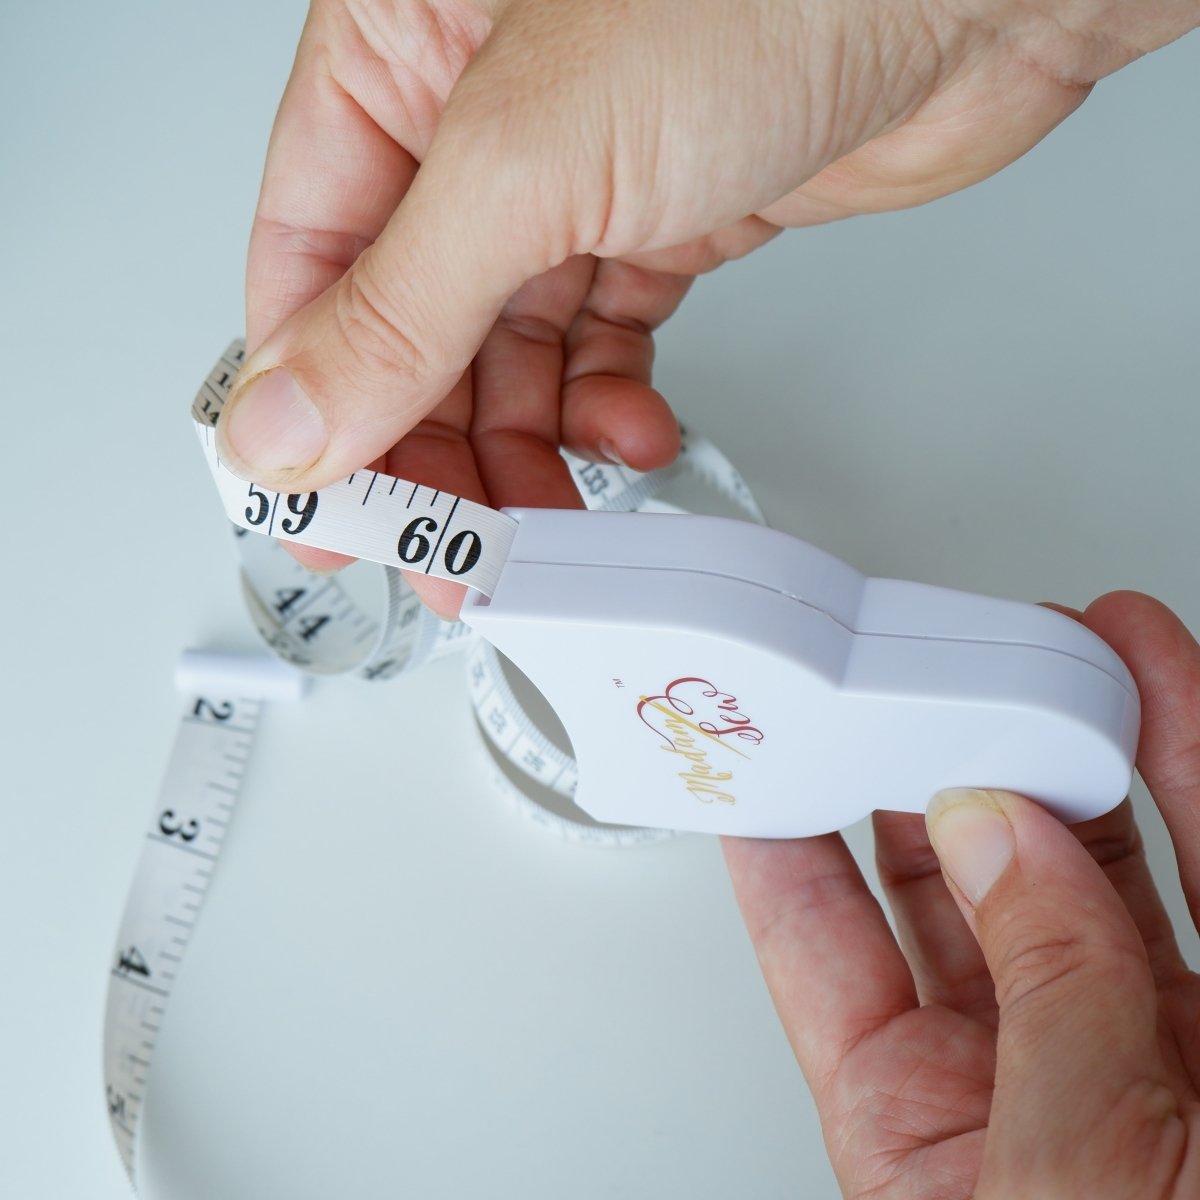 Discover the Body Self Measuring Tape - How does it work? 